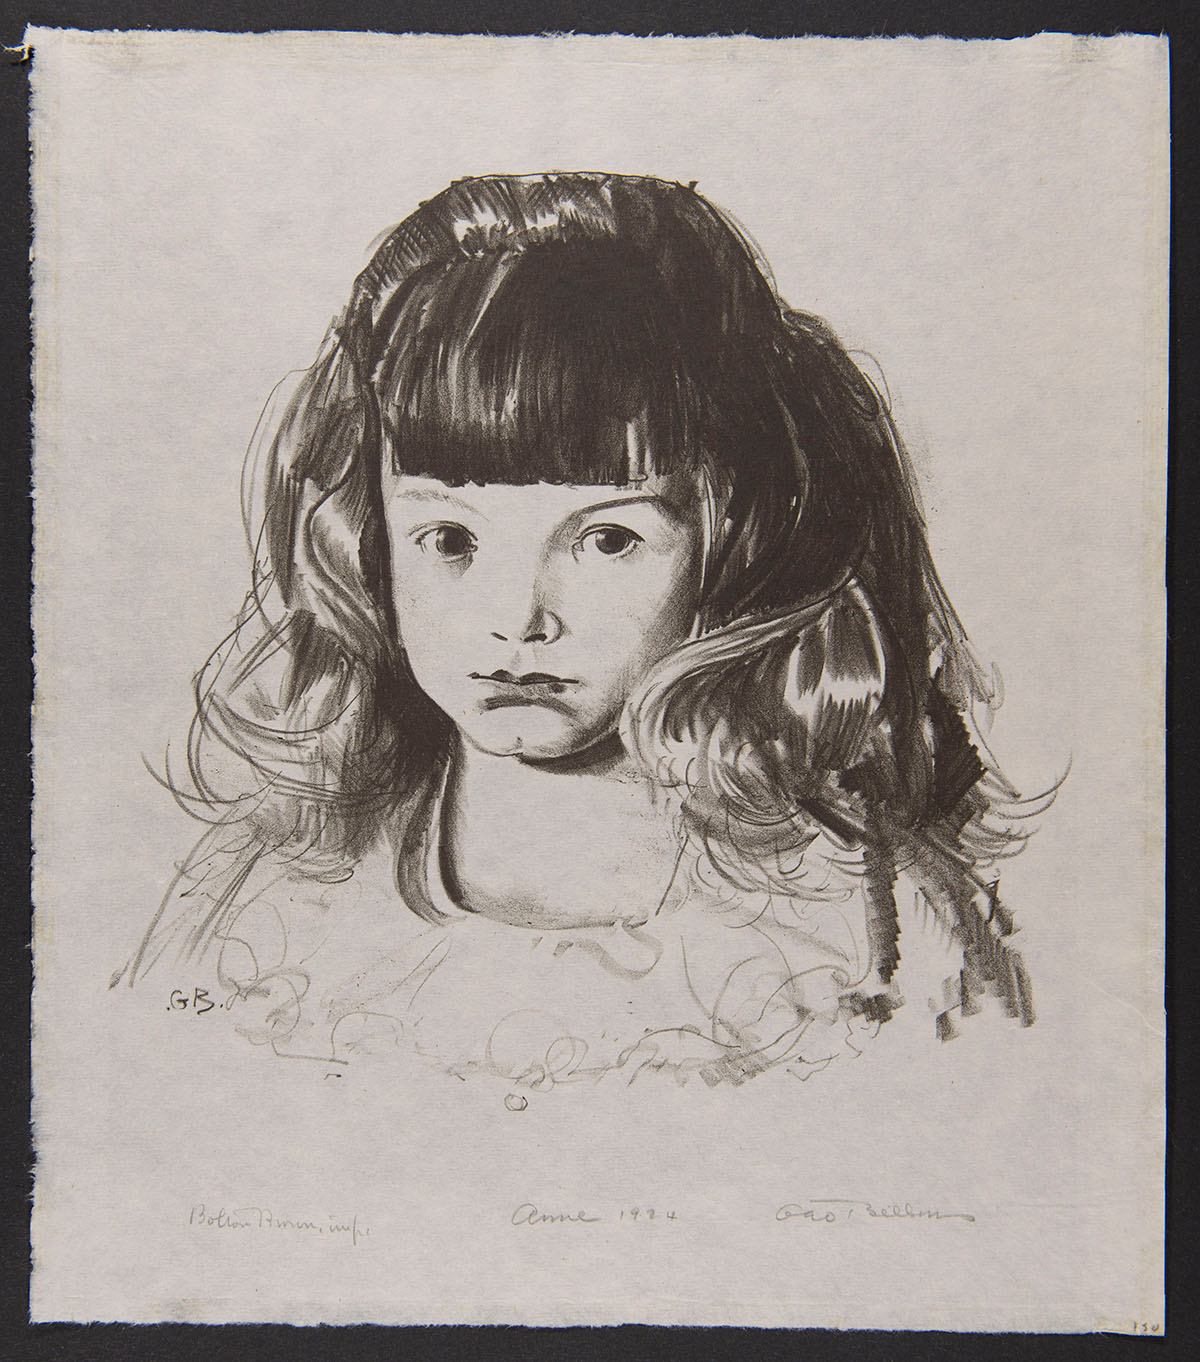 A simple illustration of a young girl. The paper is no longer yellowed or rumpled.